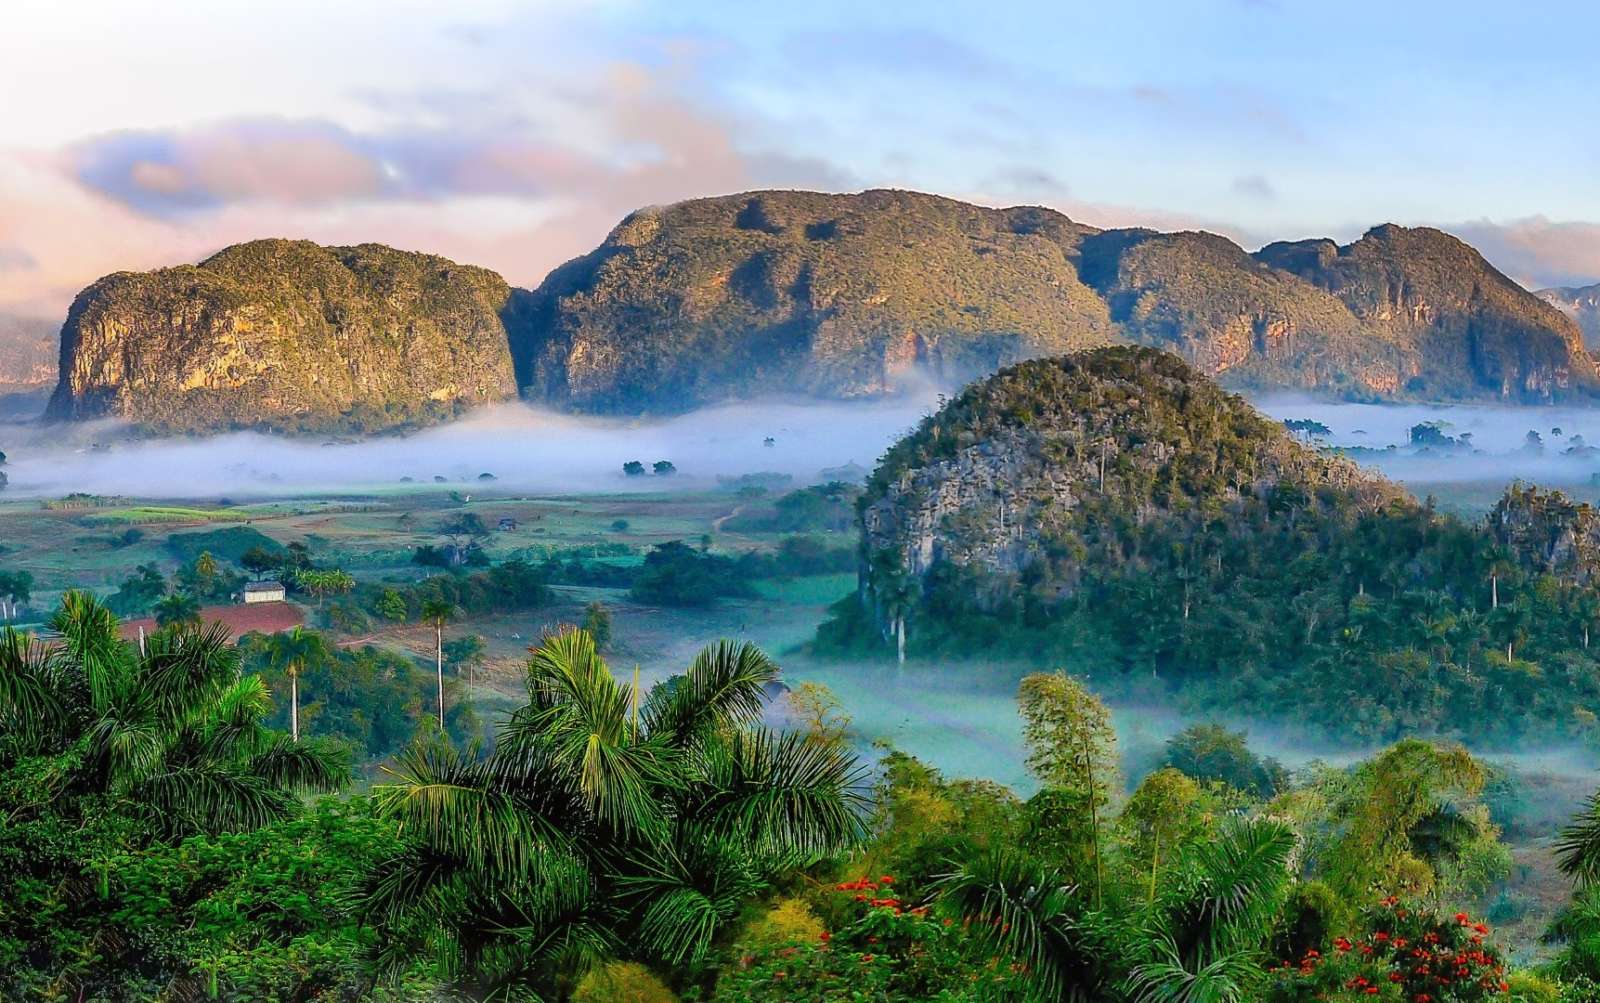 The Vinales Valley in Cuba shrouded in mist